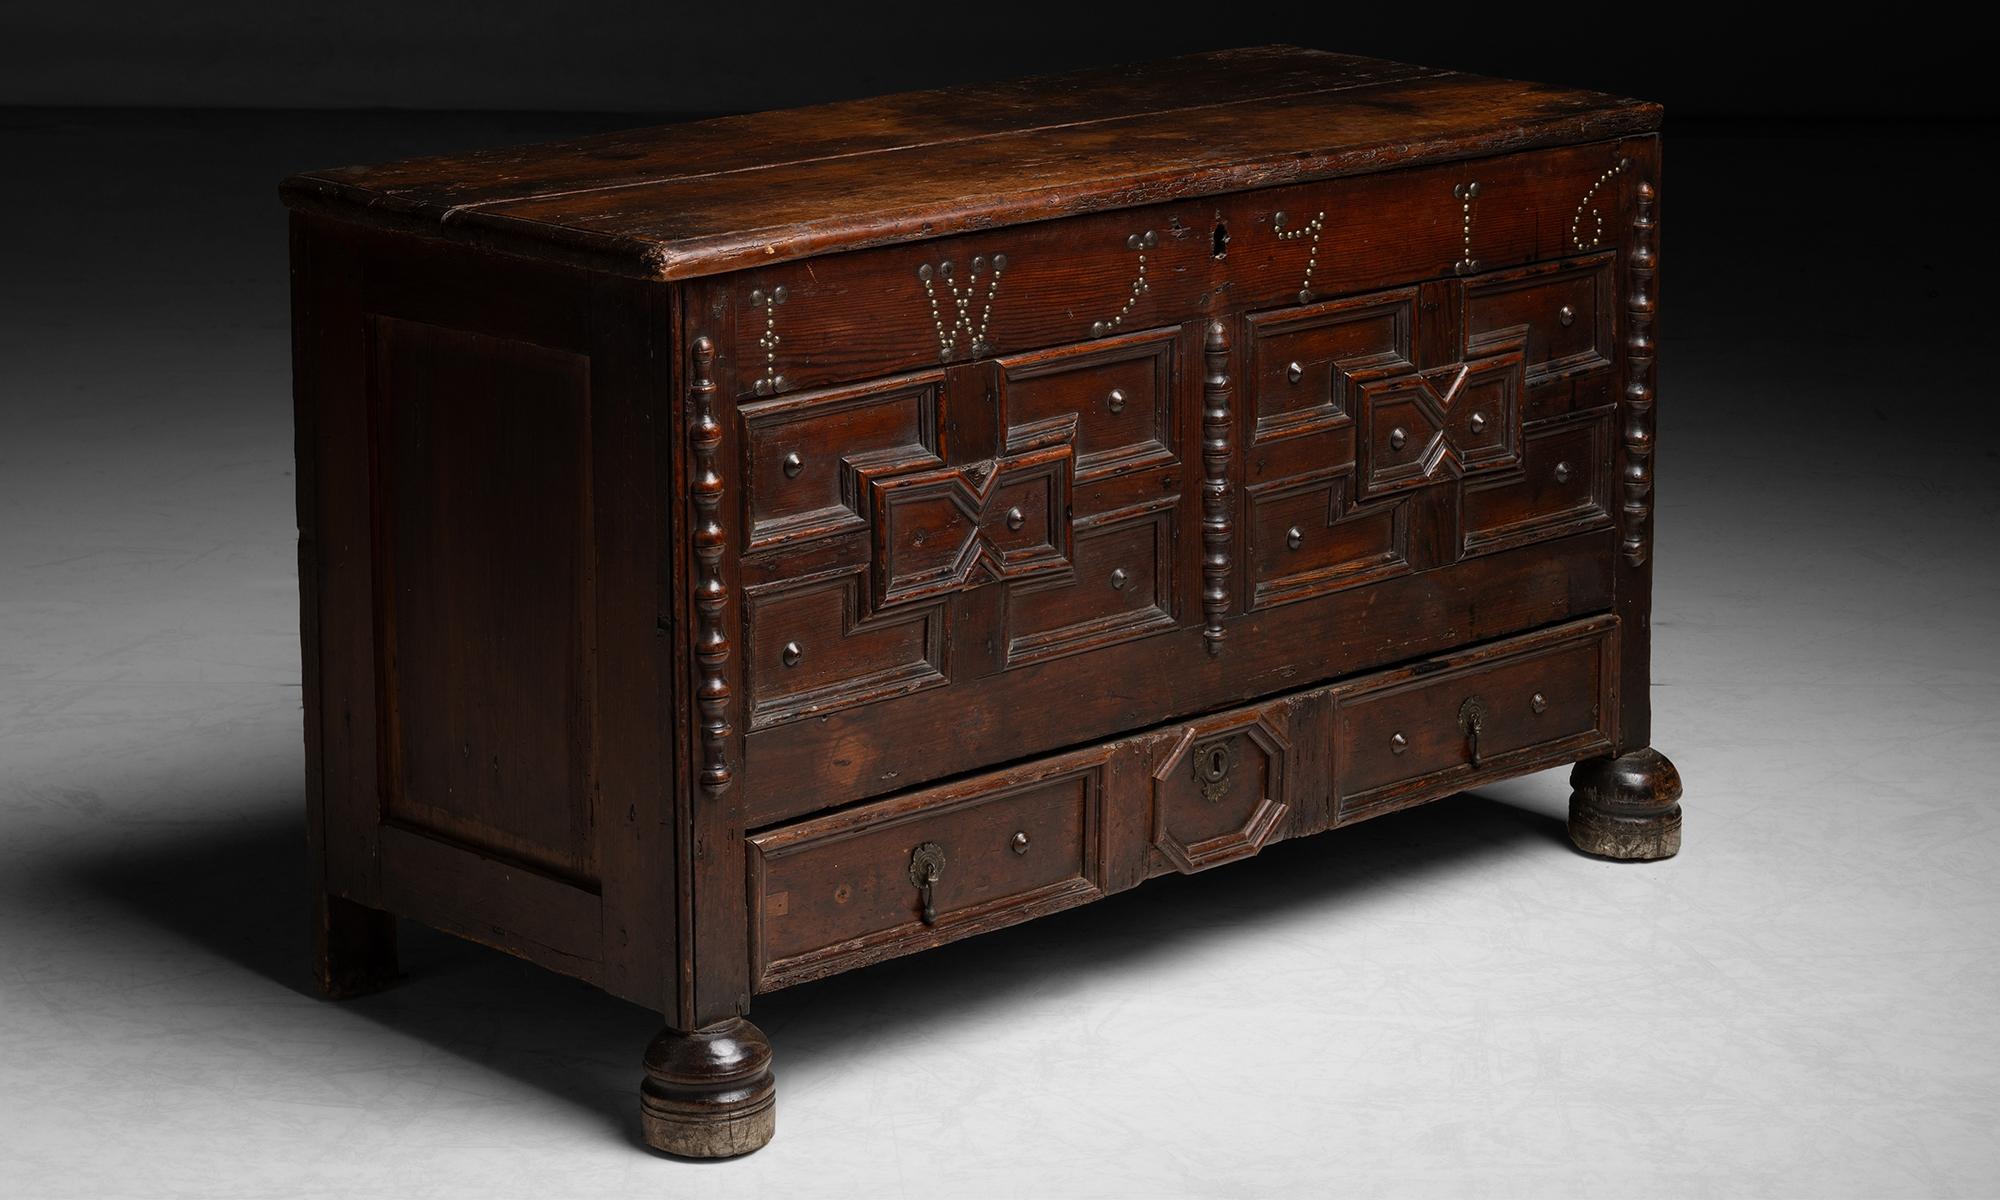 Geometric Dowery Chest, England 1716

Constructed in pine, chest with single drawer on bottom, original stain and brass studding.

45”L x 20”d x 27”h

Ref. CFRN1197